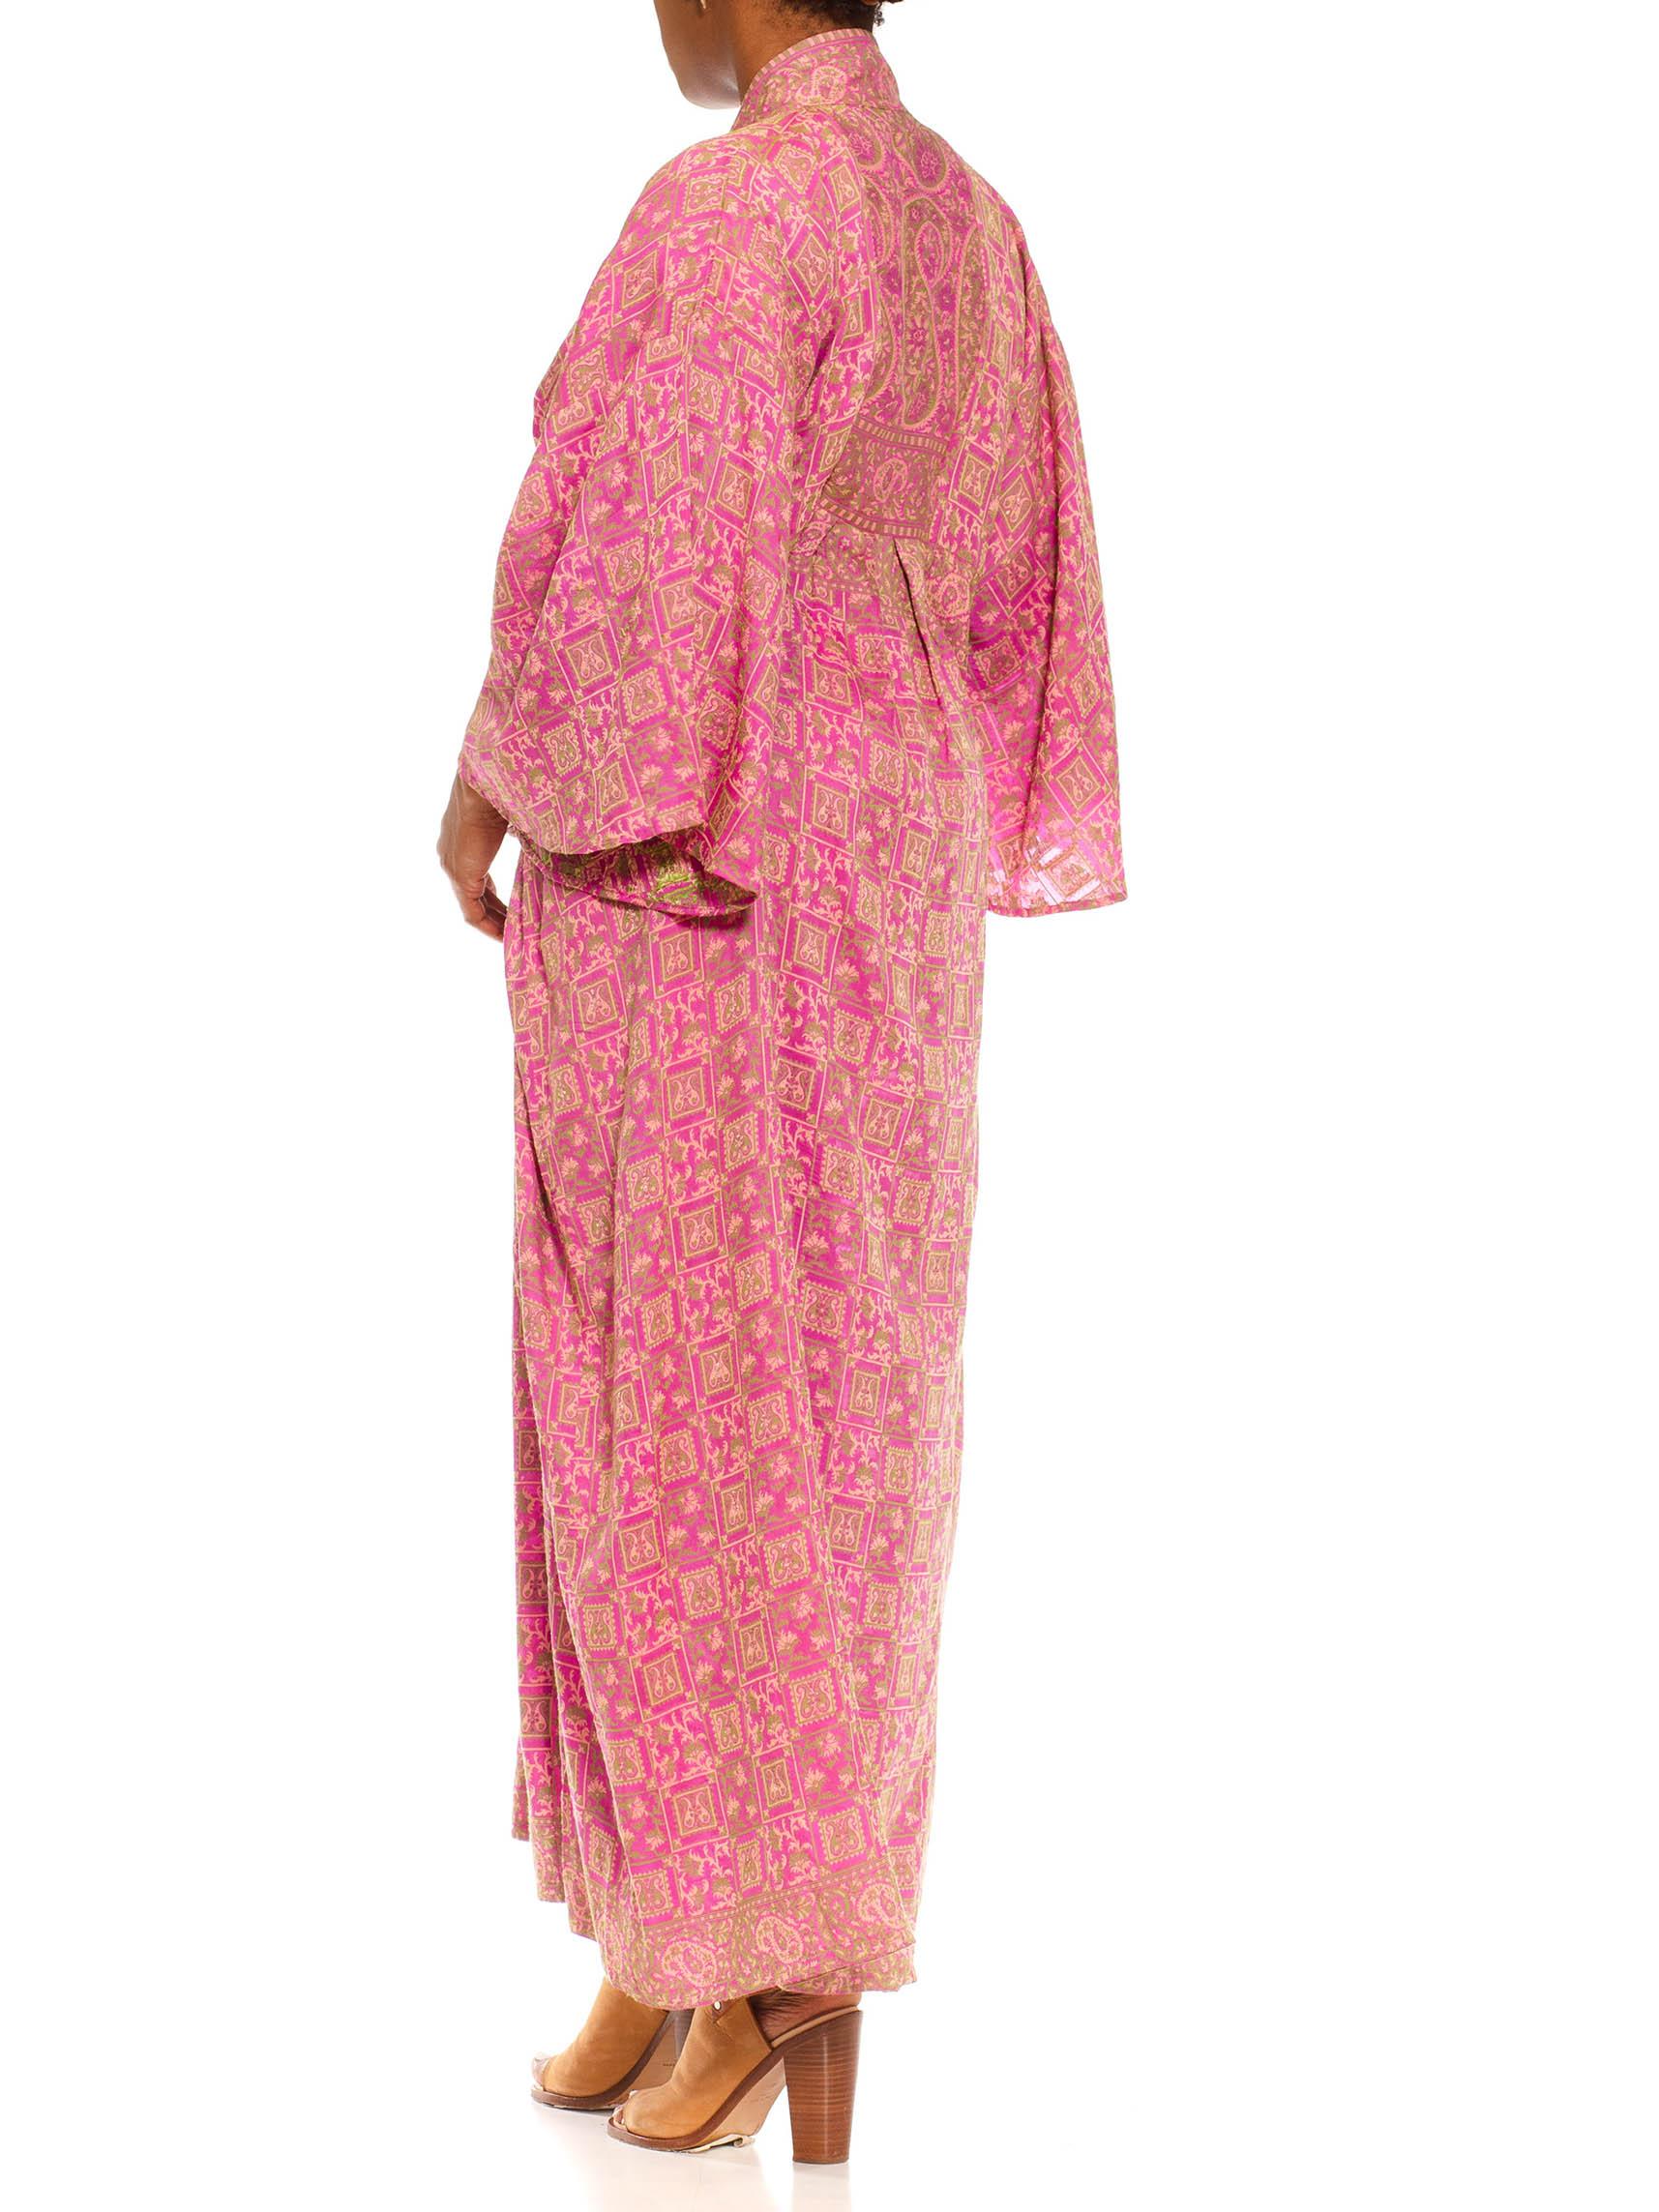 MORPHEW COLLECTION Lilac & Green Silk Geometric Paisley Kaftan Made From Vintag For Sale 2